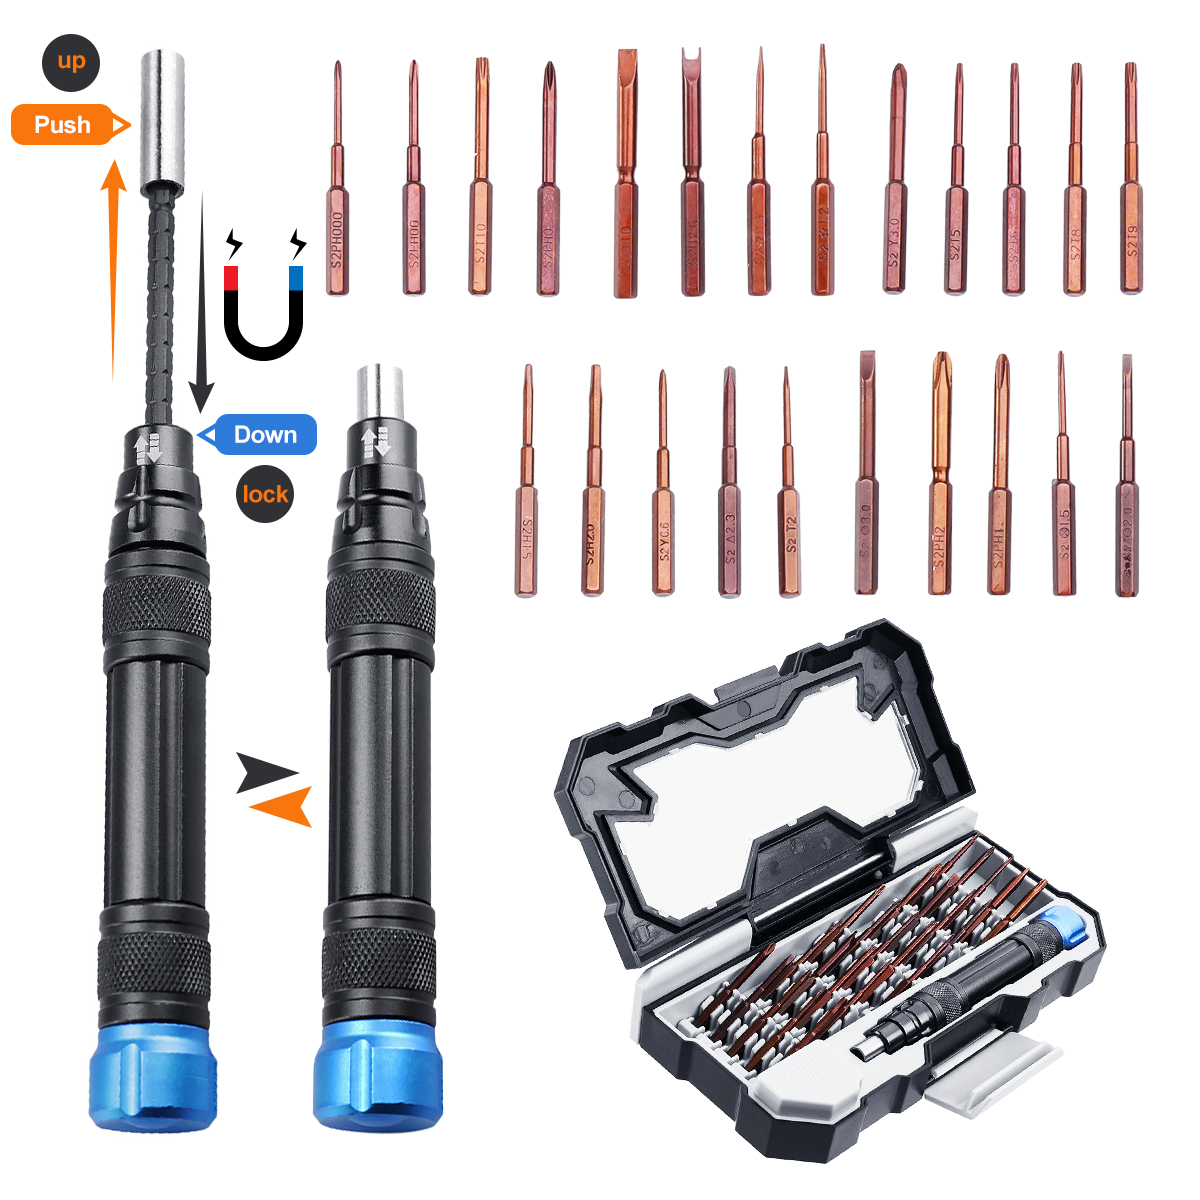 Baban-24-In-1-Precision-Screwdriver-Set-Screwdriver-Combination-For-iPhone-Computer-Notebook-Disasse-1960898-5